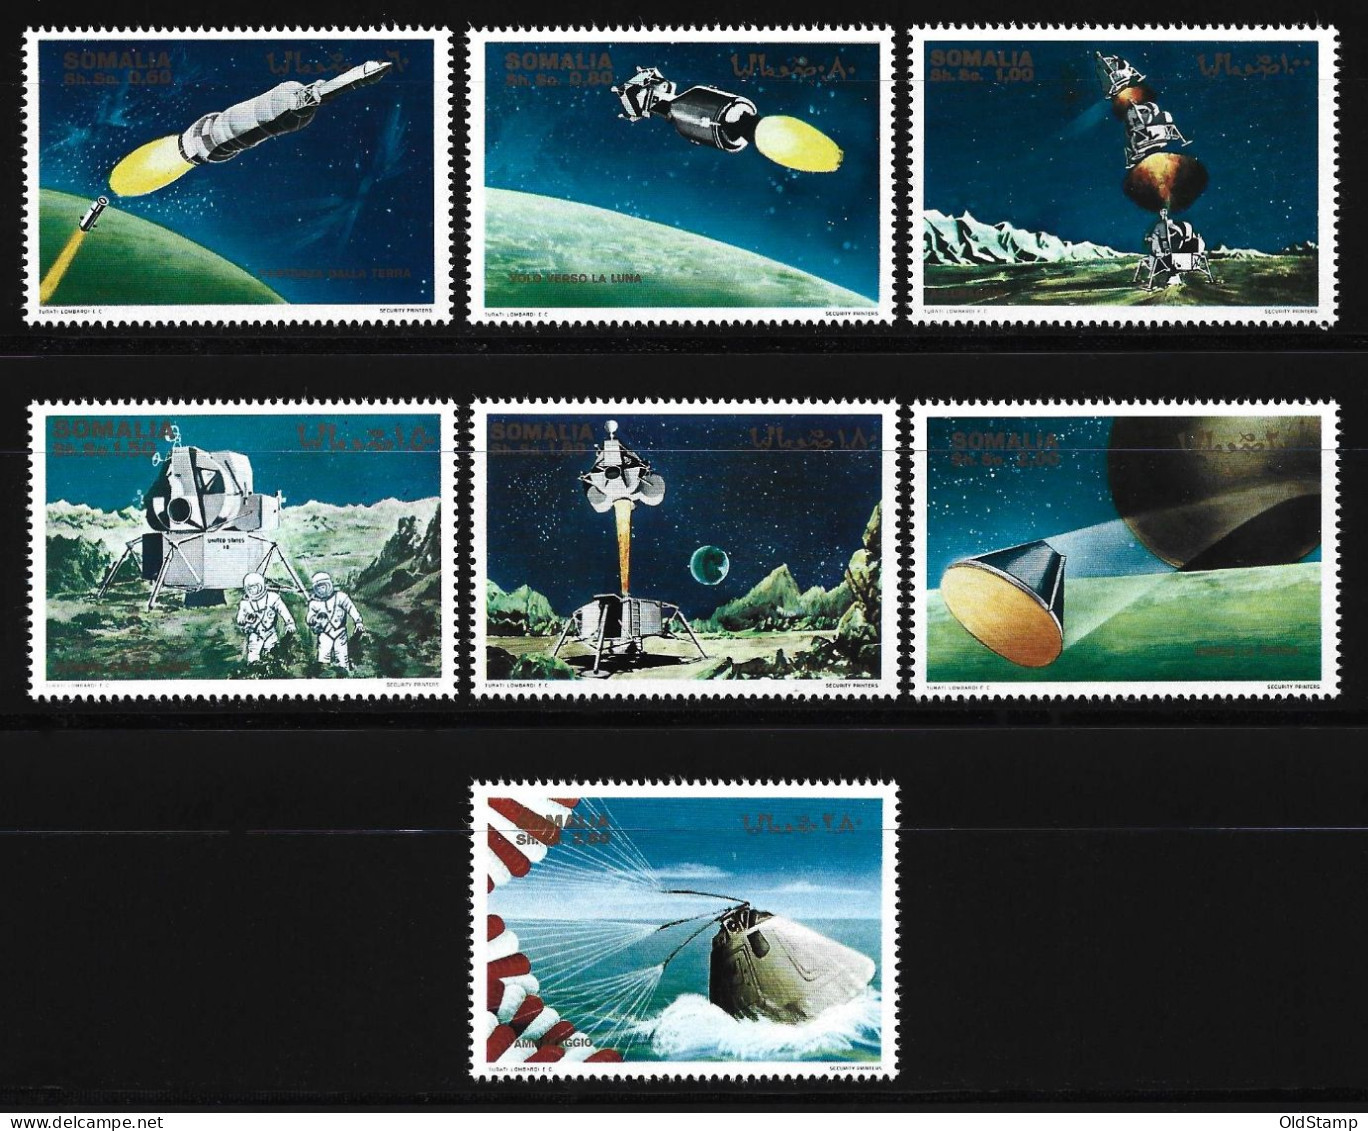 SPACE Somalia SPACE SPACESHIP PLANET ASTRONAUT STAR MNH LUXE Africa Stamps FULL SET - Verzamelingen